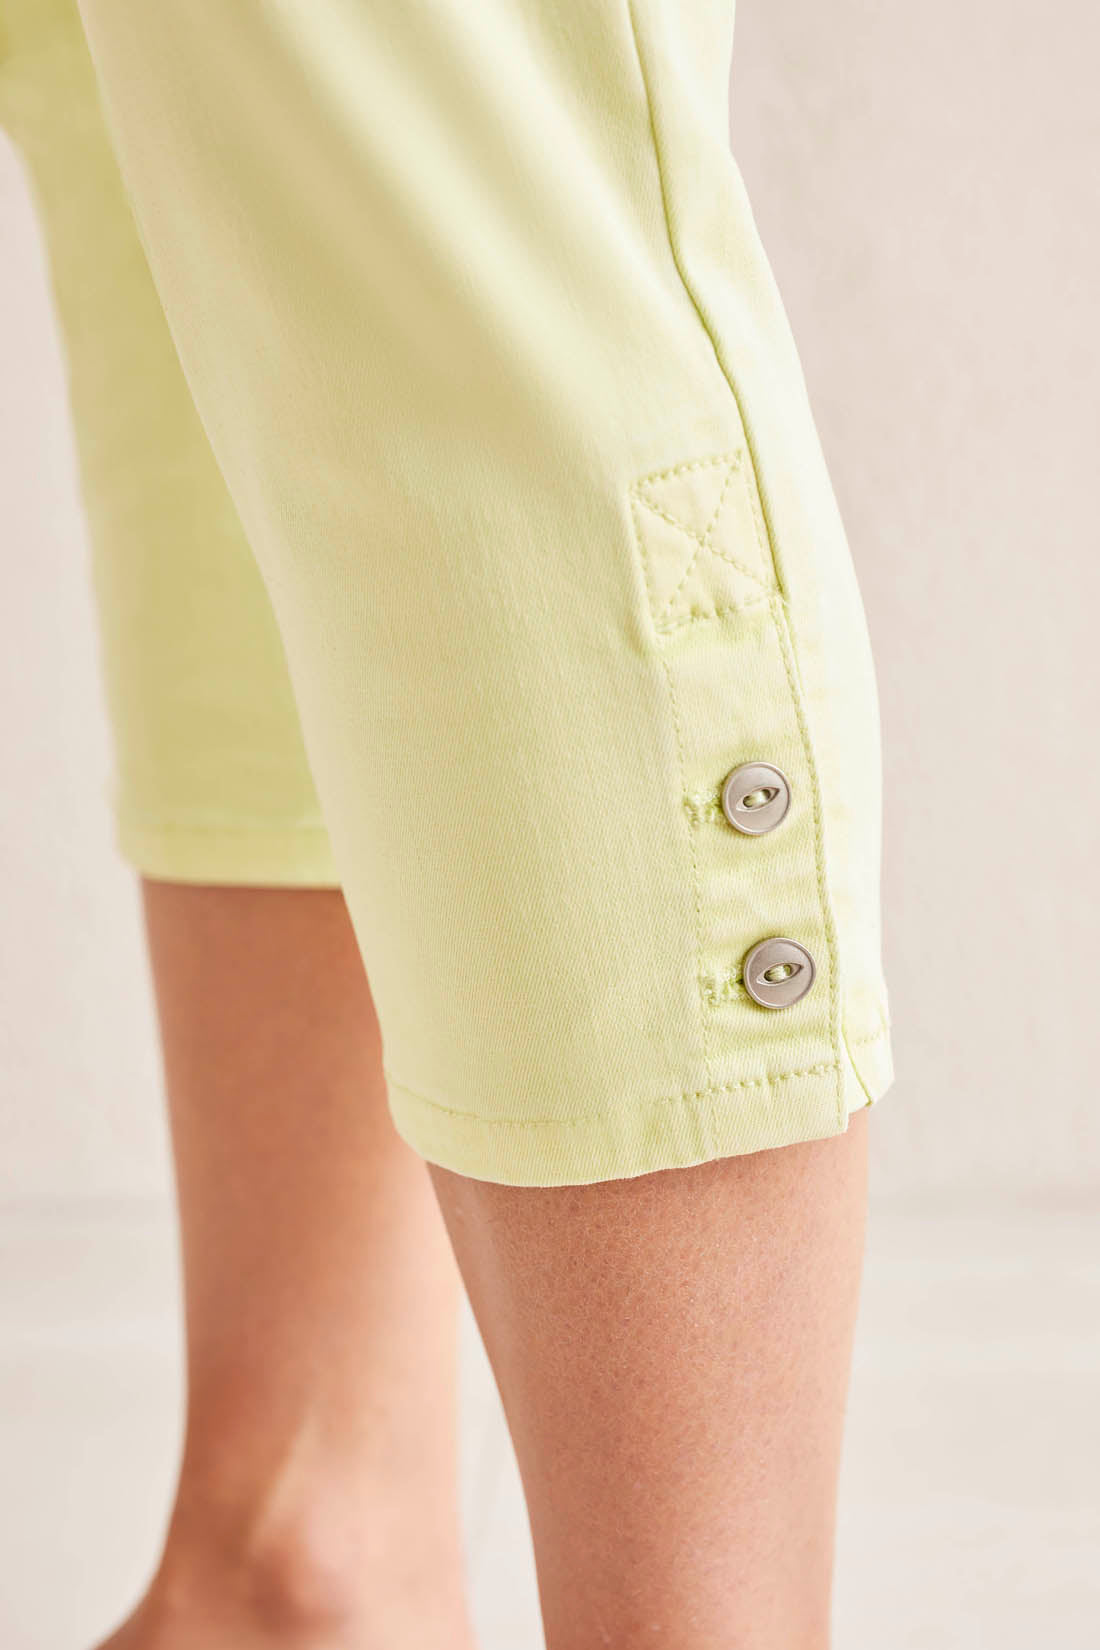 Tribal Jeans Wildlime Bermuda Shorts with Side Slits